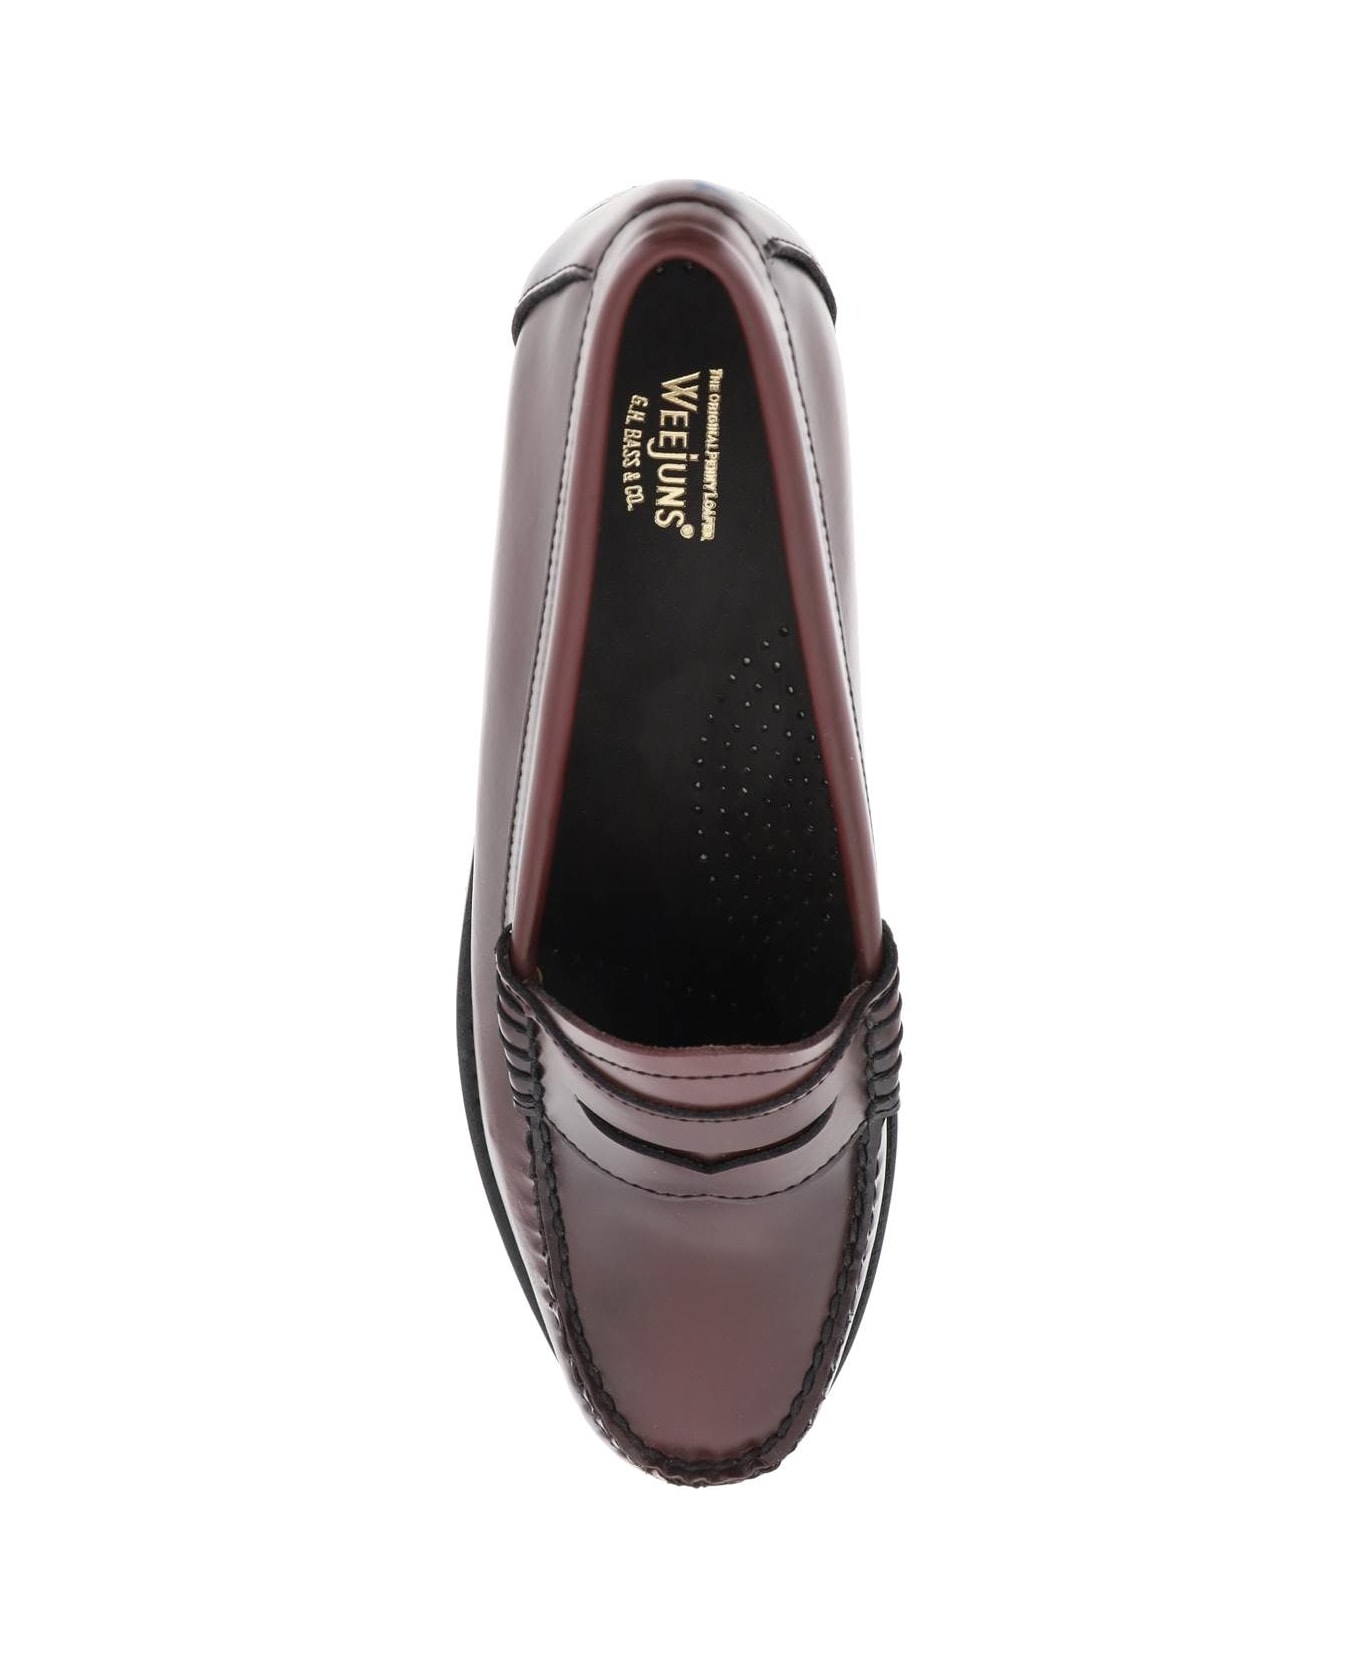 G.H.Bass & Co. 'weejuns' Penny Loafers - WINE (Red) フラットシューズ